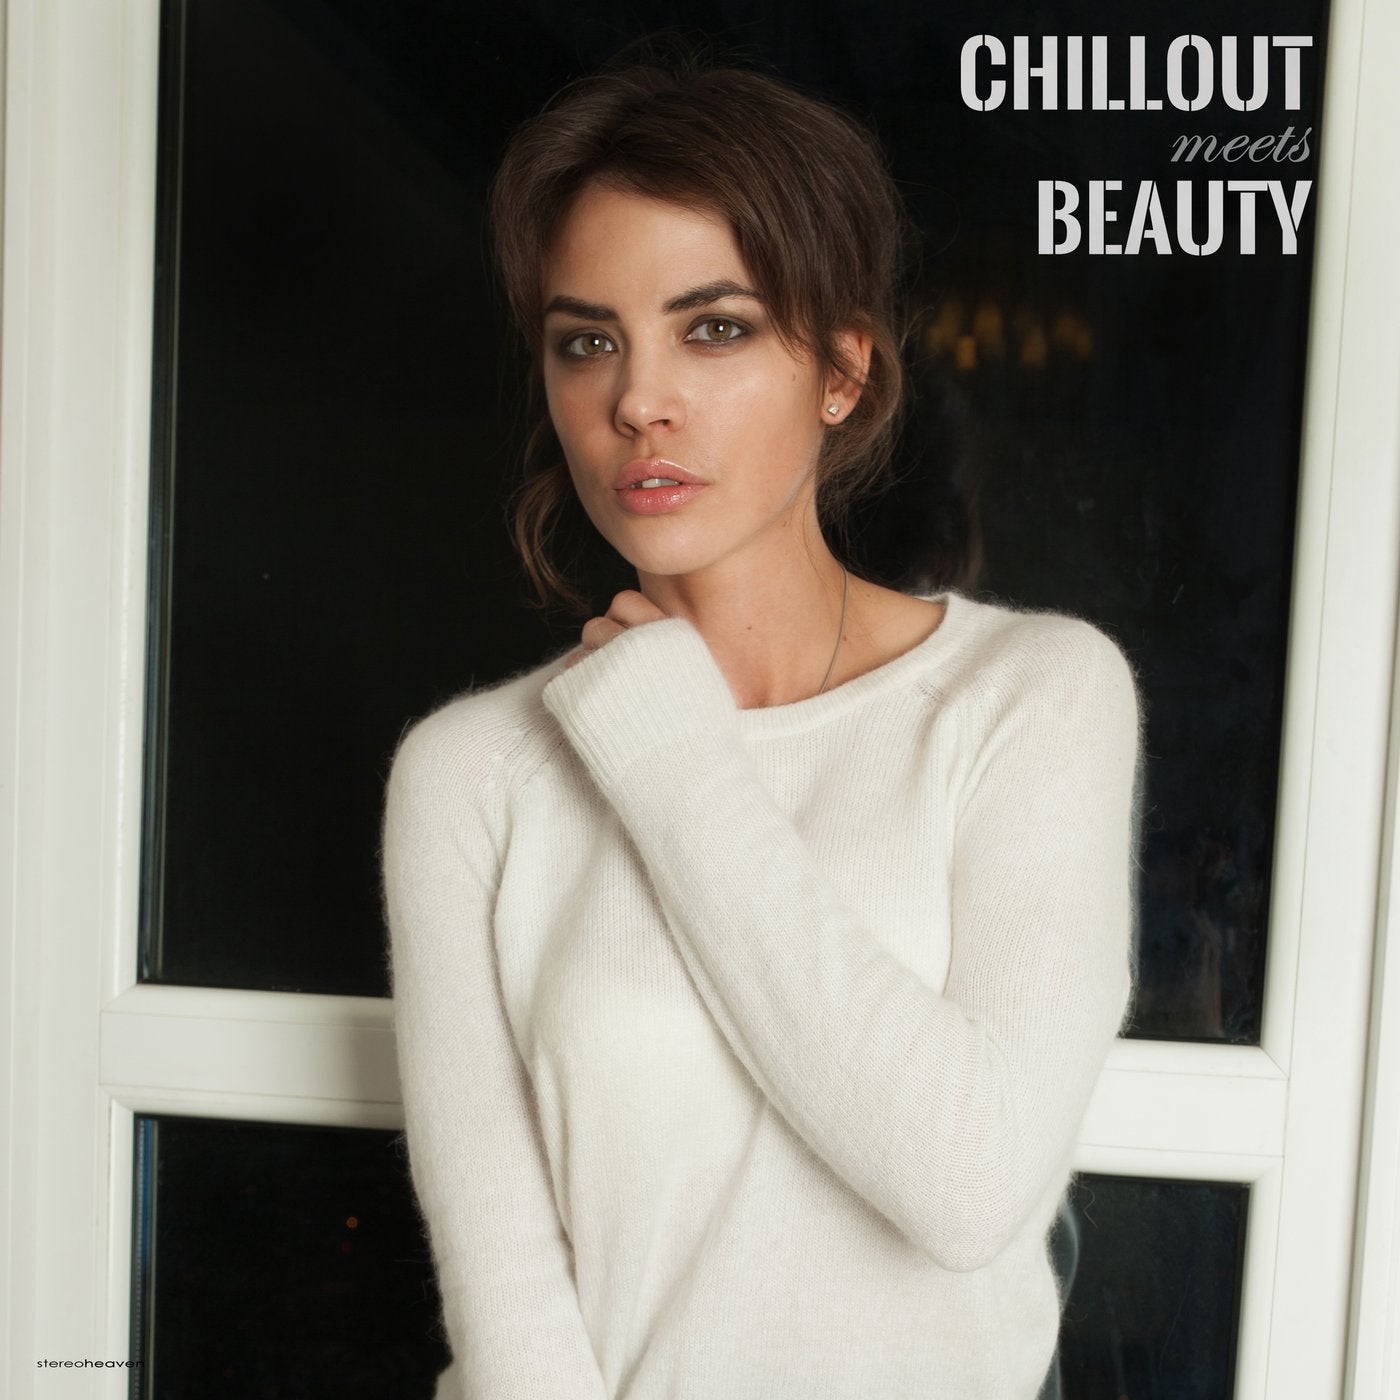 Chillout Meets Beauty